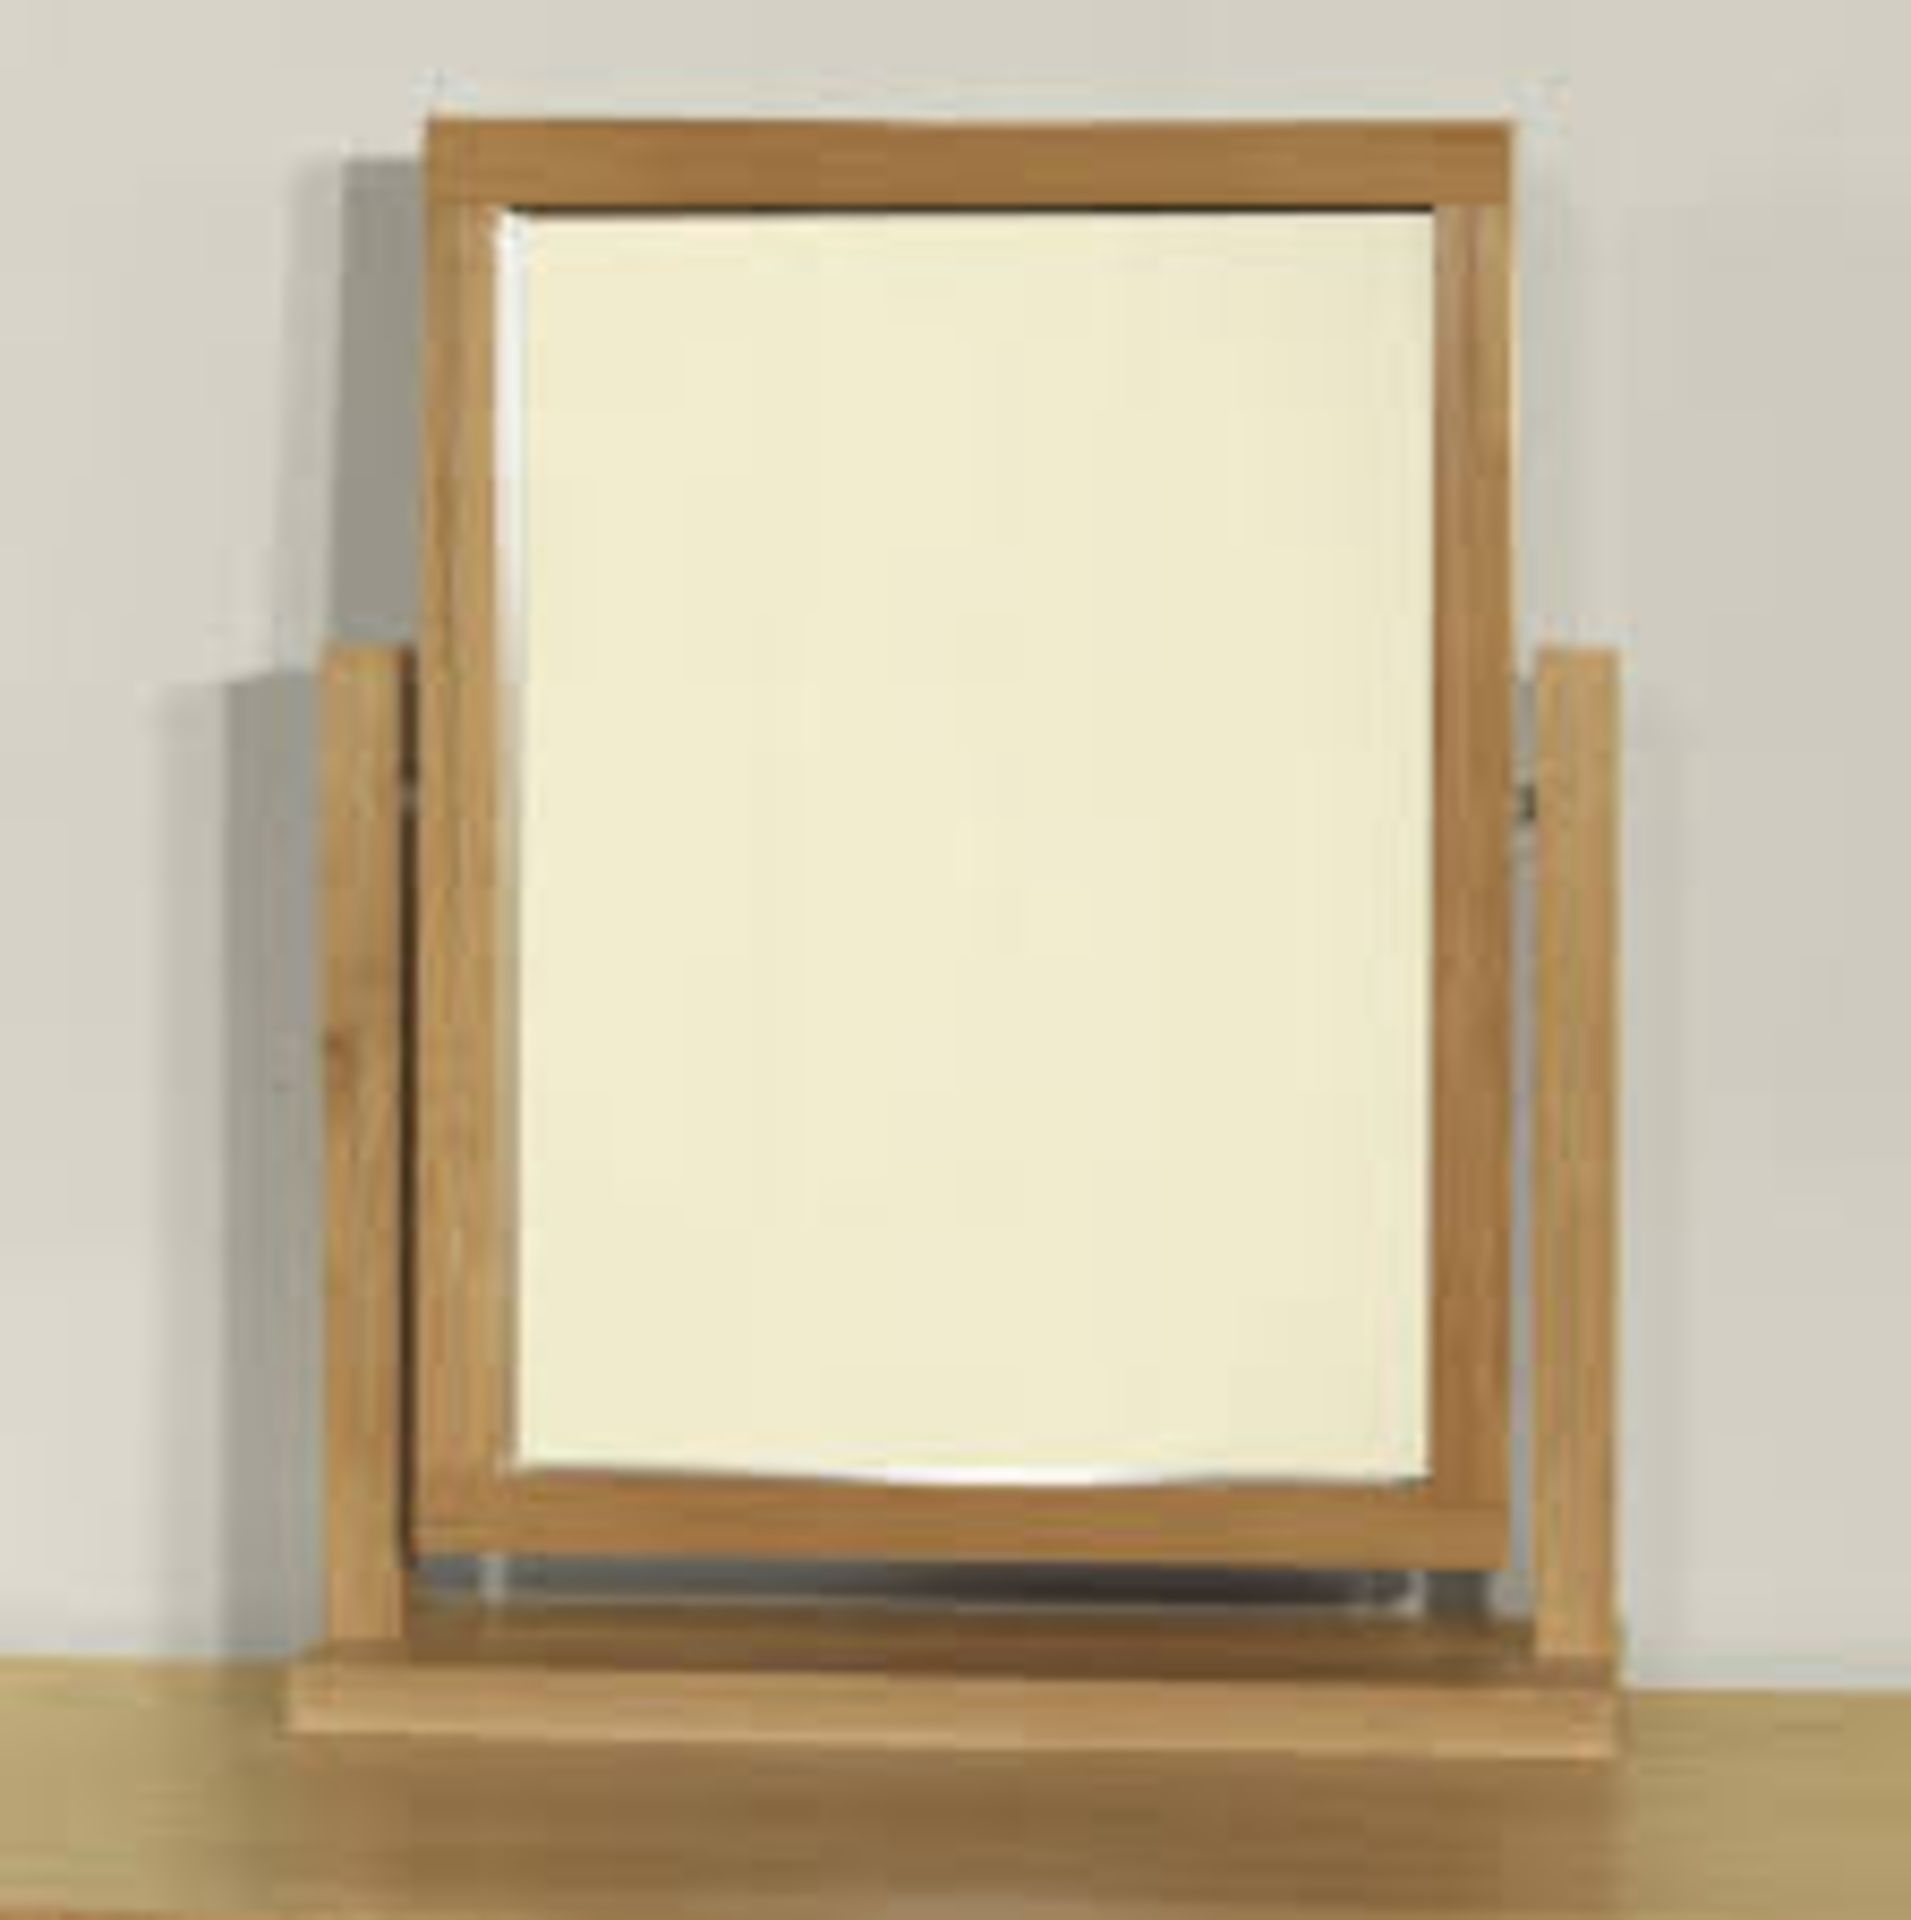 1 x BOXED BRAND NEW DRESSING UP MIRROR   *PLEASE NOTE THAT THE BID PRICE IS MULTIPLIED BY THE NUMBER